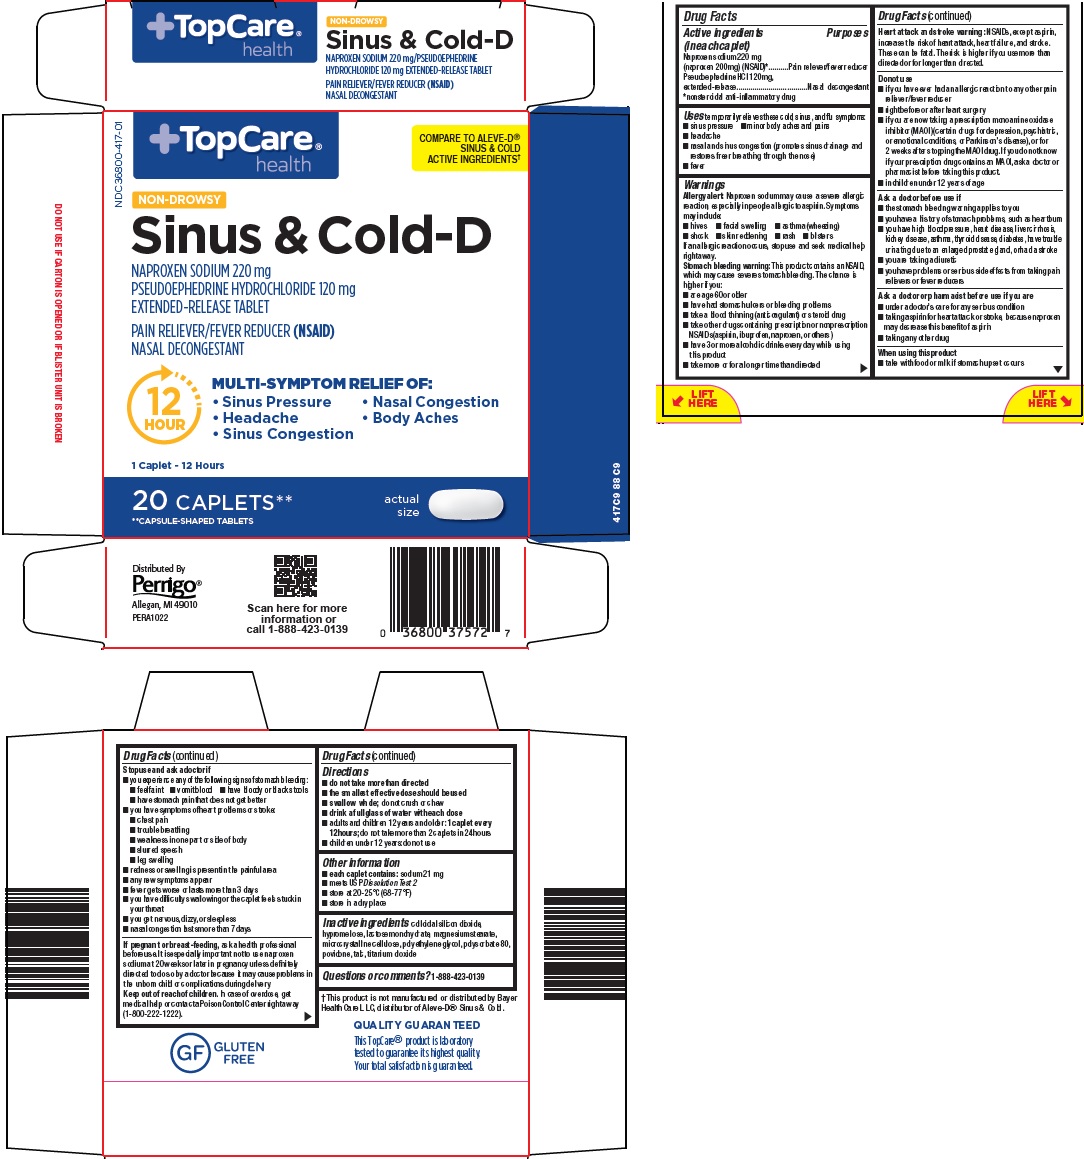 sinus and cold D image 1